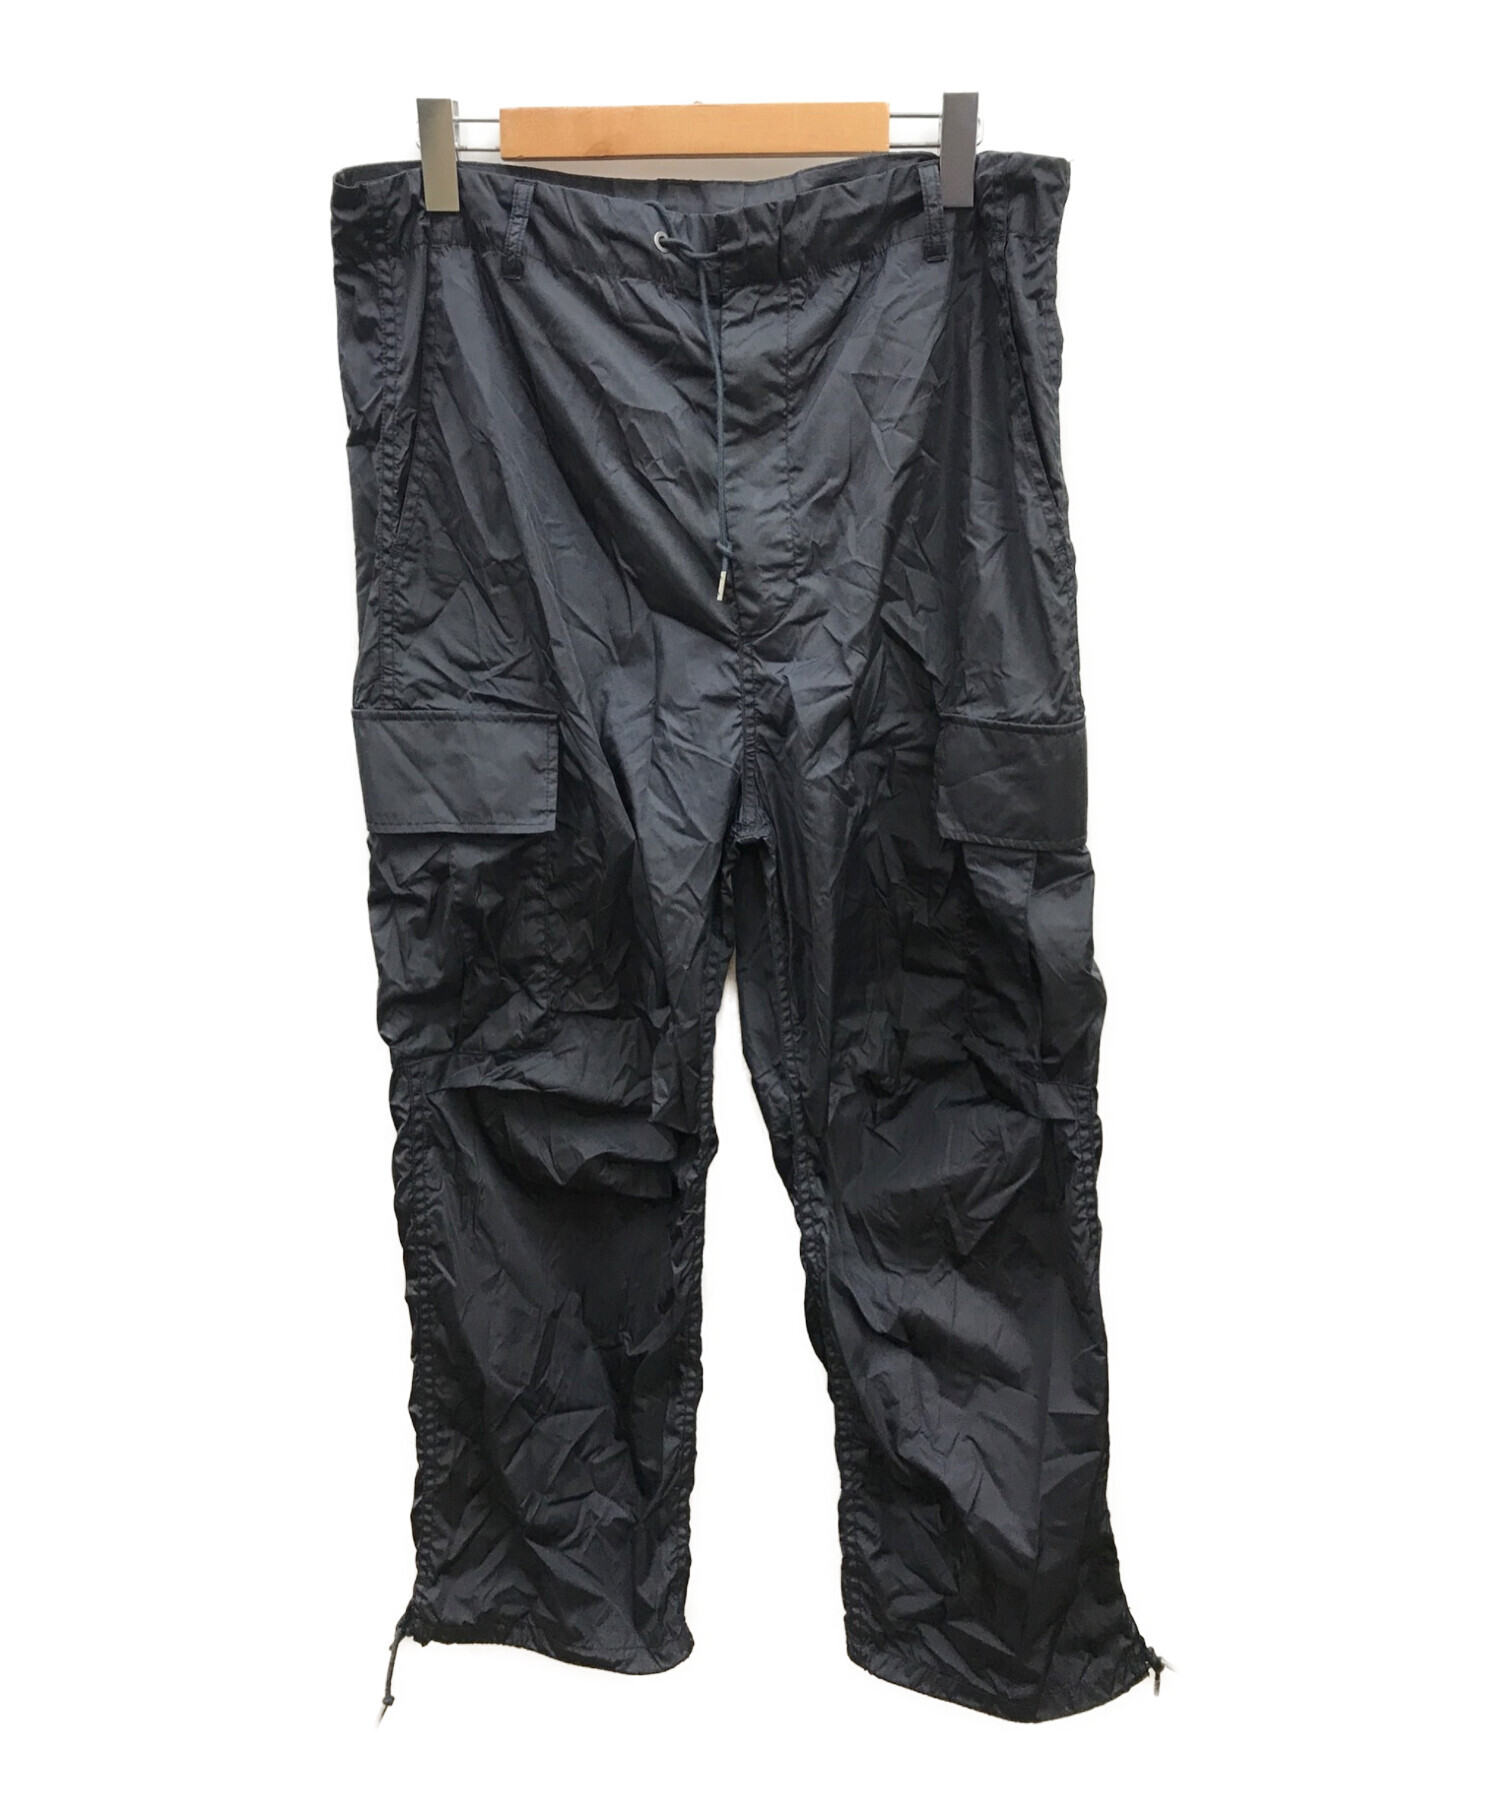 H BEAUTY＆YOUTH CARGO PANTS - ワークパンツ